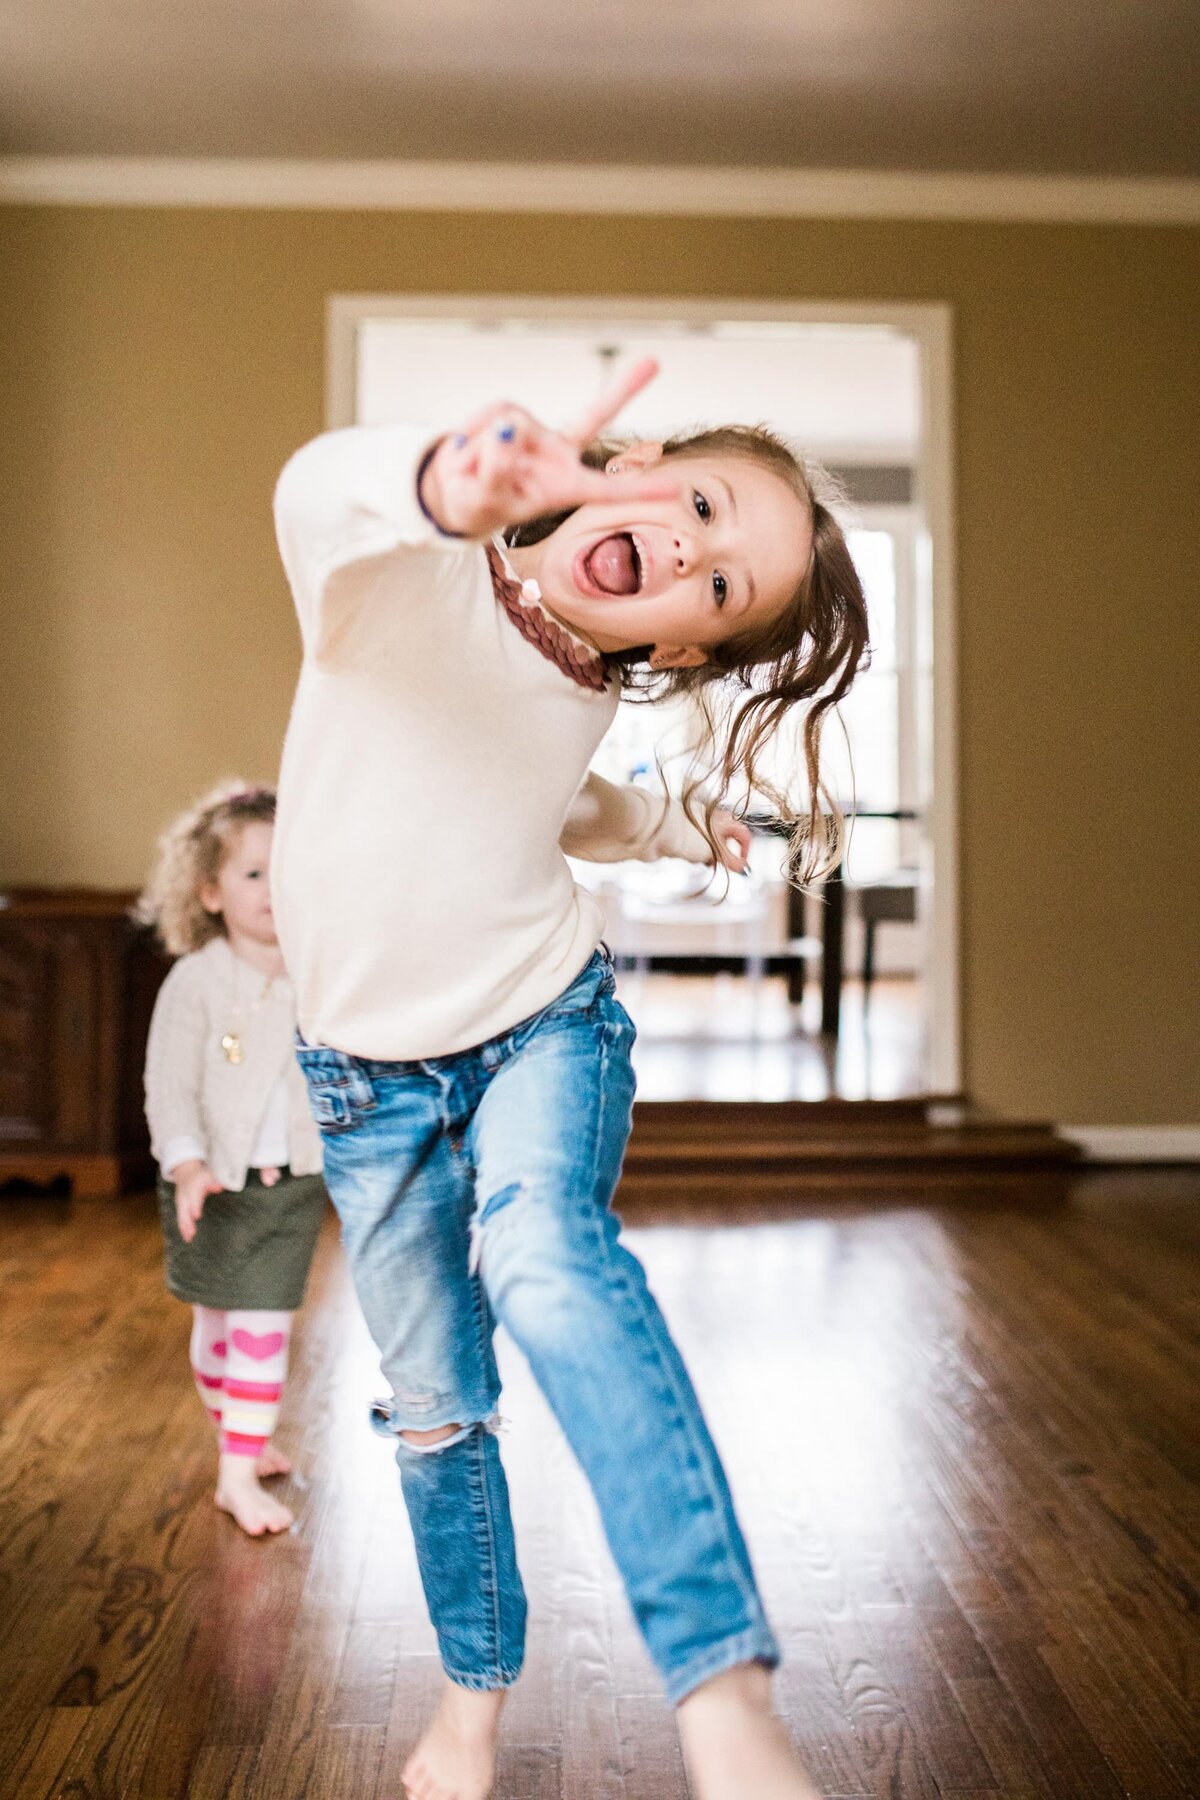 A young girl playfully jumps in a living room, sticking her tongue out at the camera, while a smaller child watches in the background. Captured by a talented family photographer Pittsburgh PA, this moment